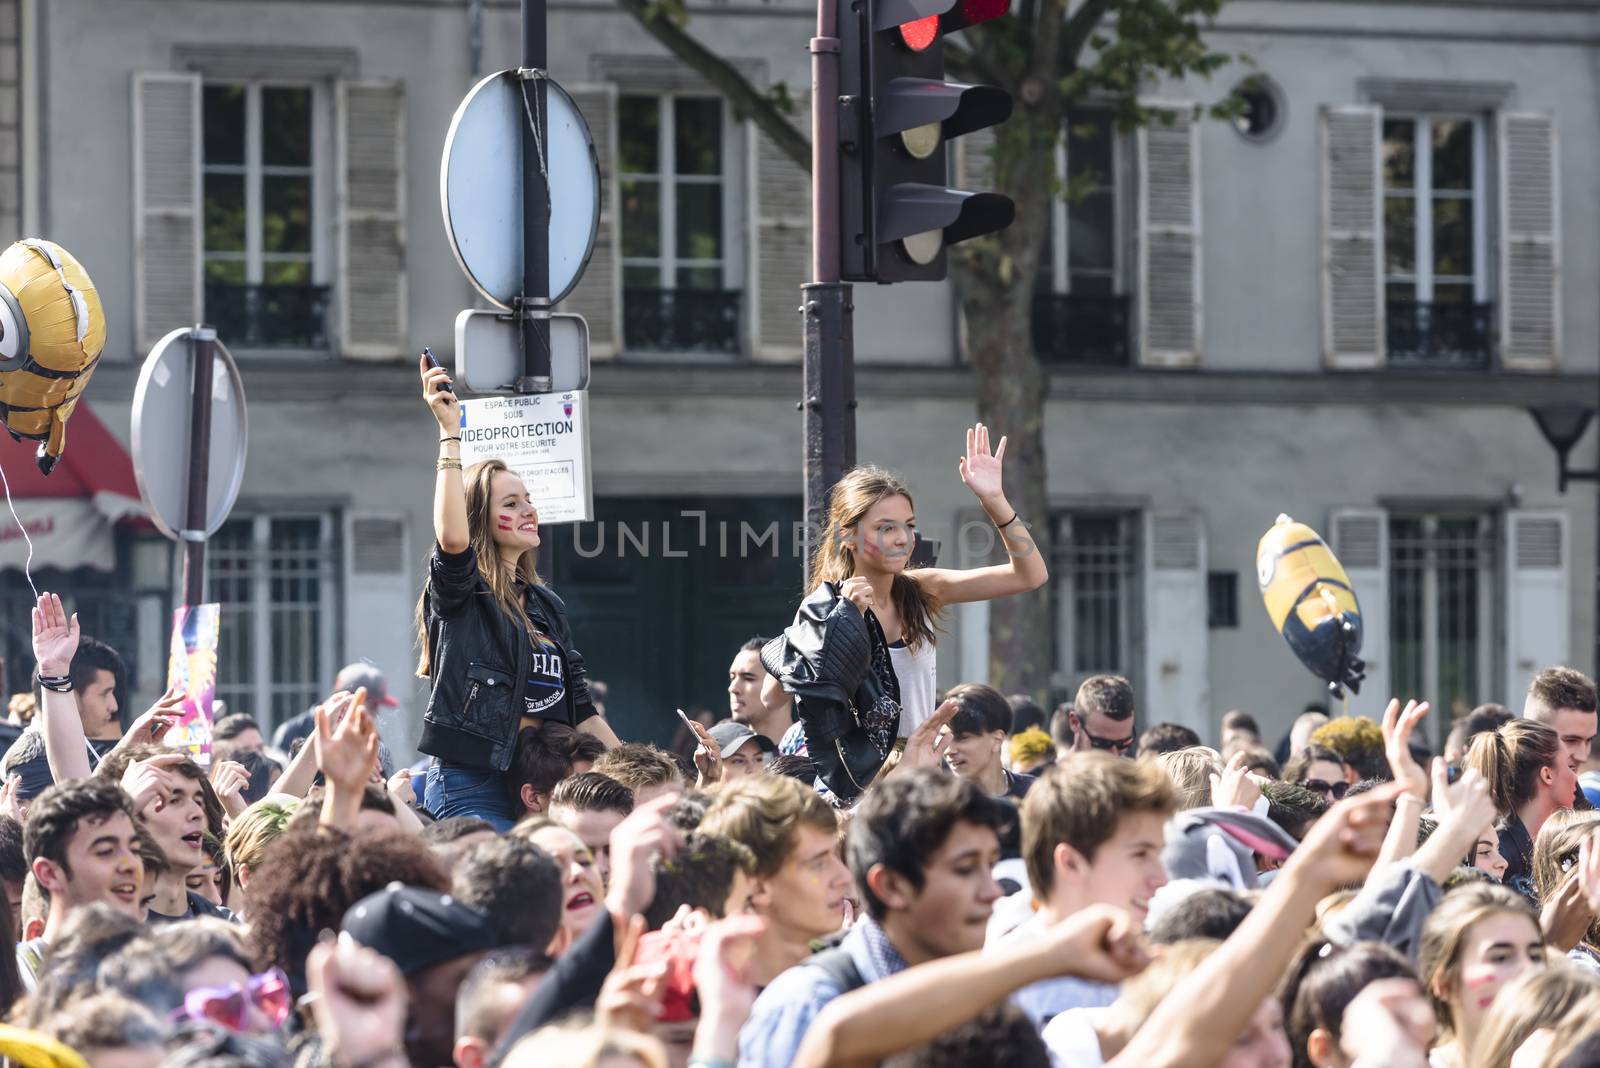 FRANCE, Paris : People dance in the street during the 18th edition of the Techno Parade music event in Paris on September 19, 2015.